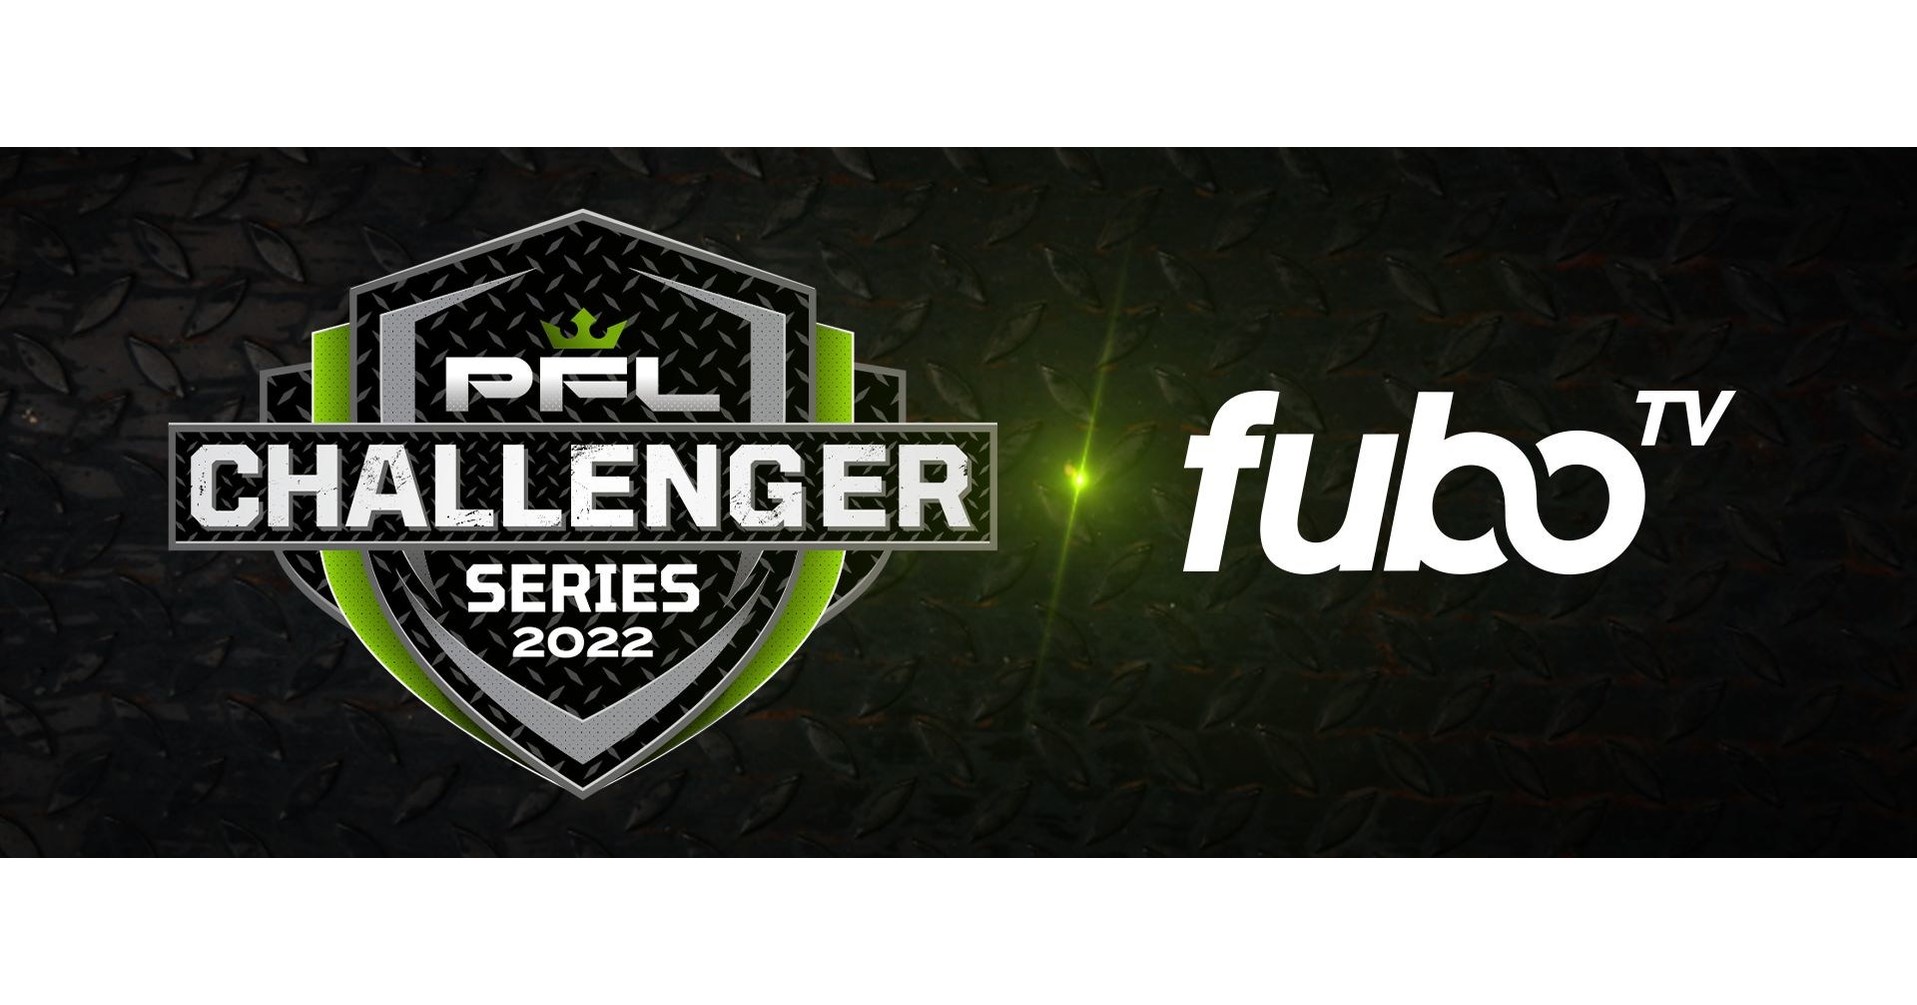 PROFESSIONAL FIGHTERS LEAGUE CHALLENGER SERIES HEAVYWEIGHT ROSTER AND